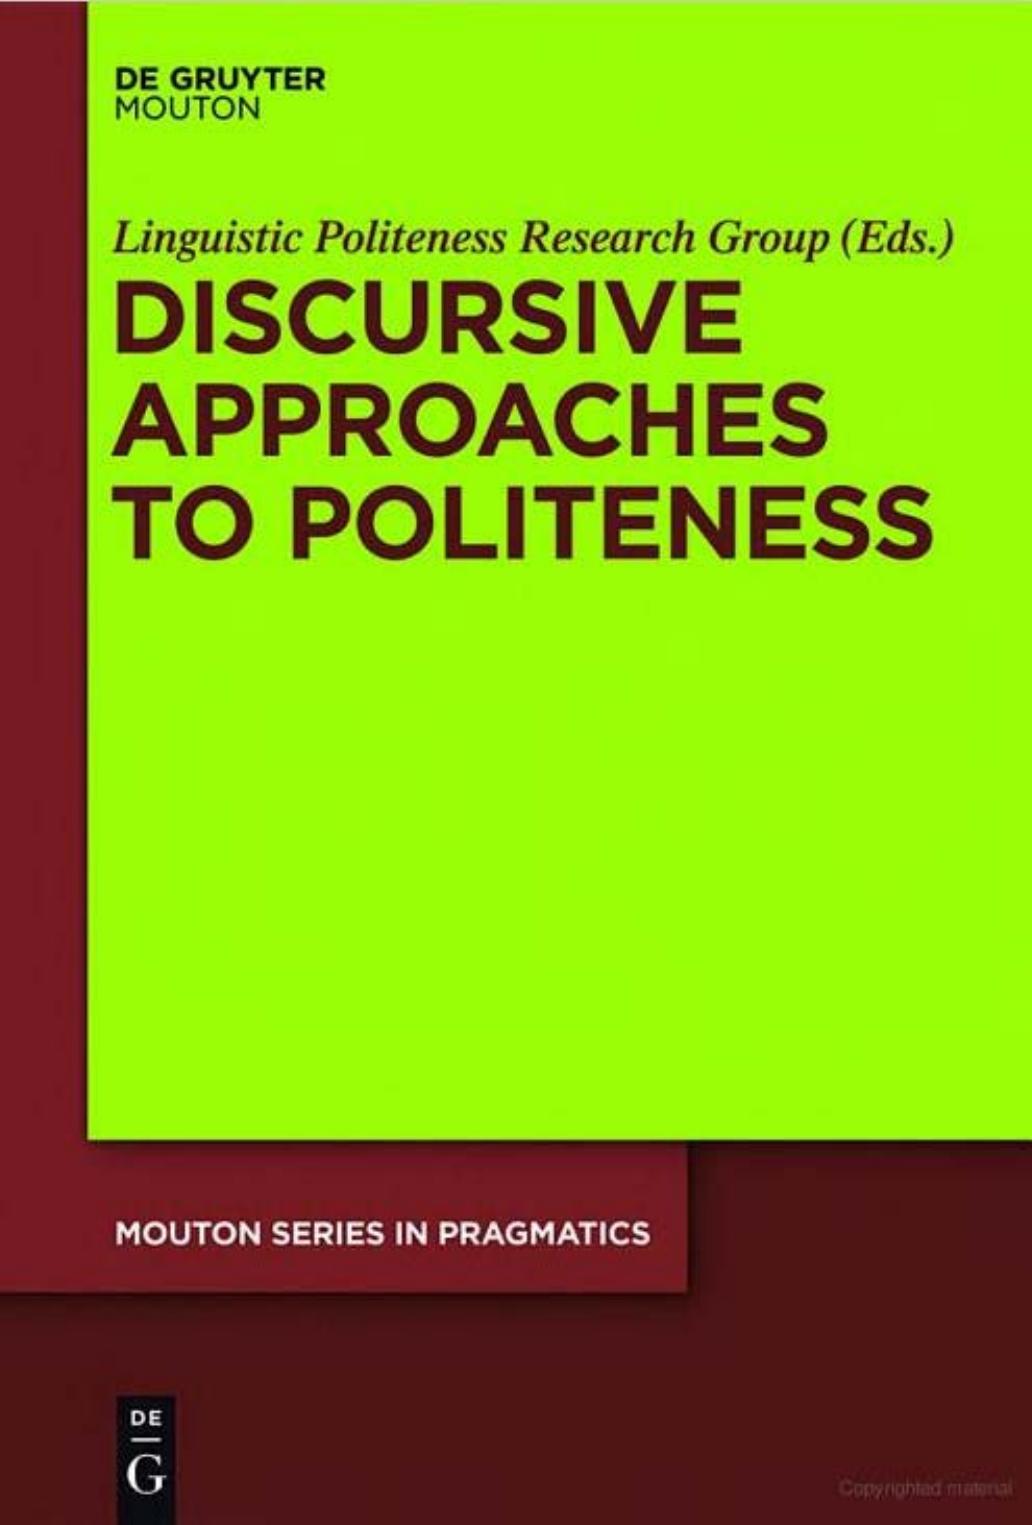 Linguistic Politeness Research Group - Discursive Approaches to Politeness